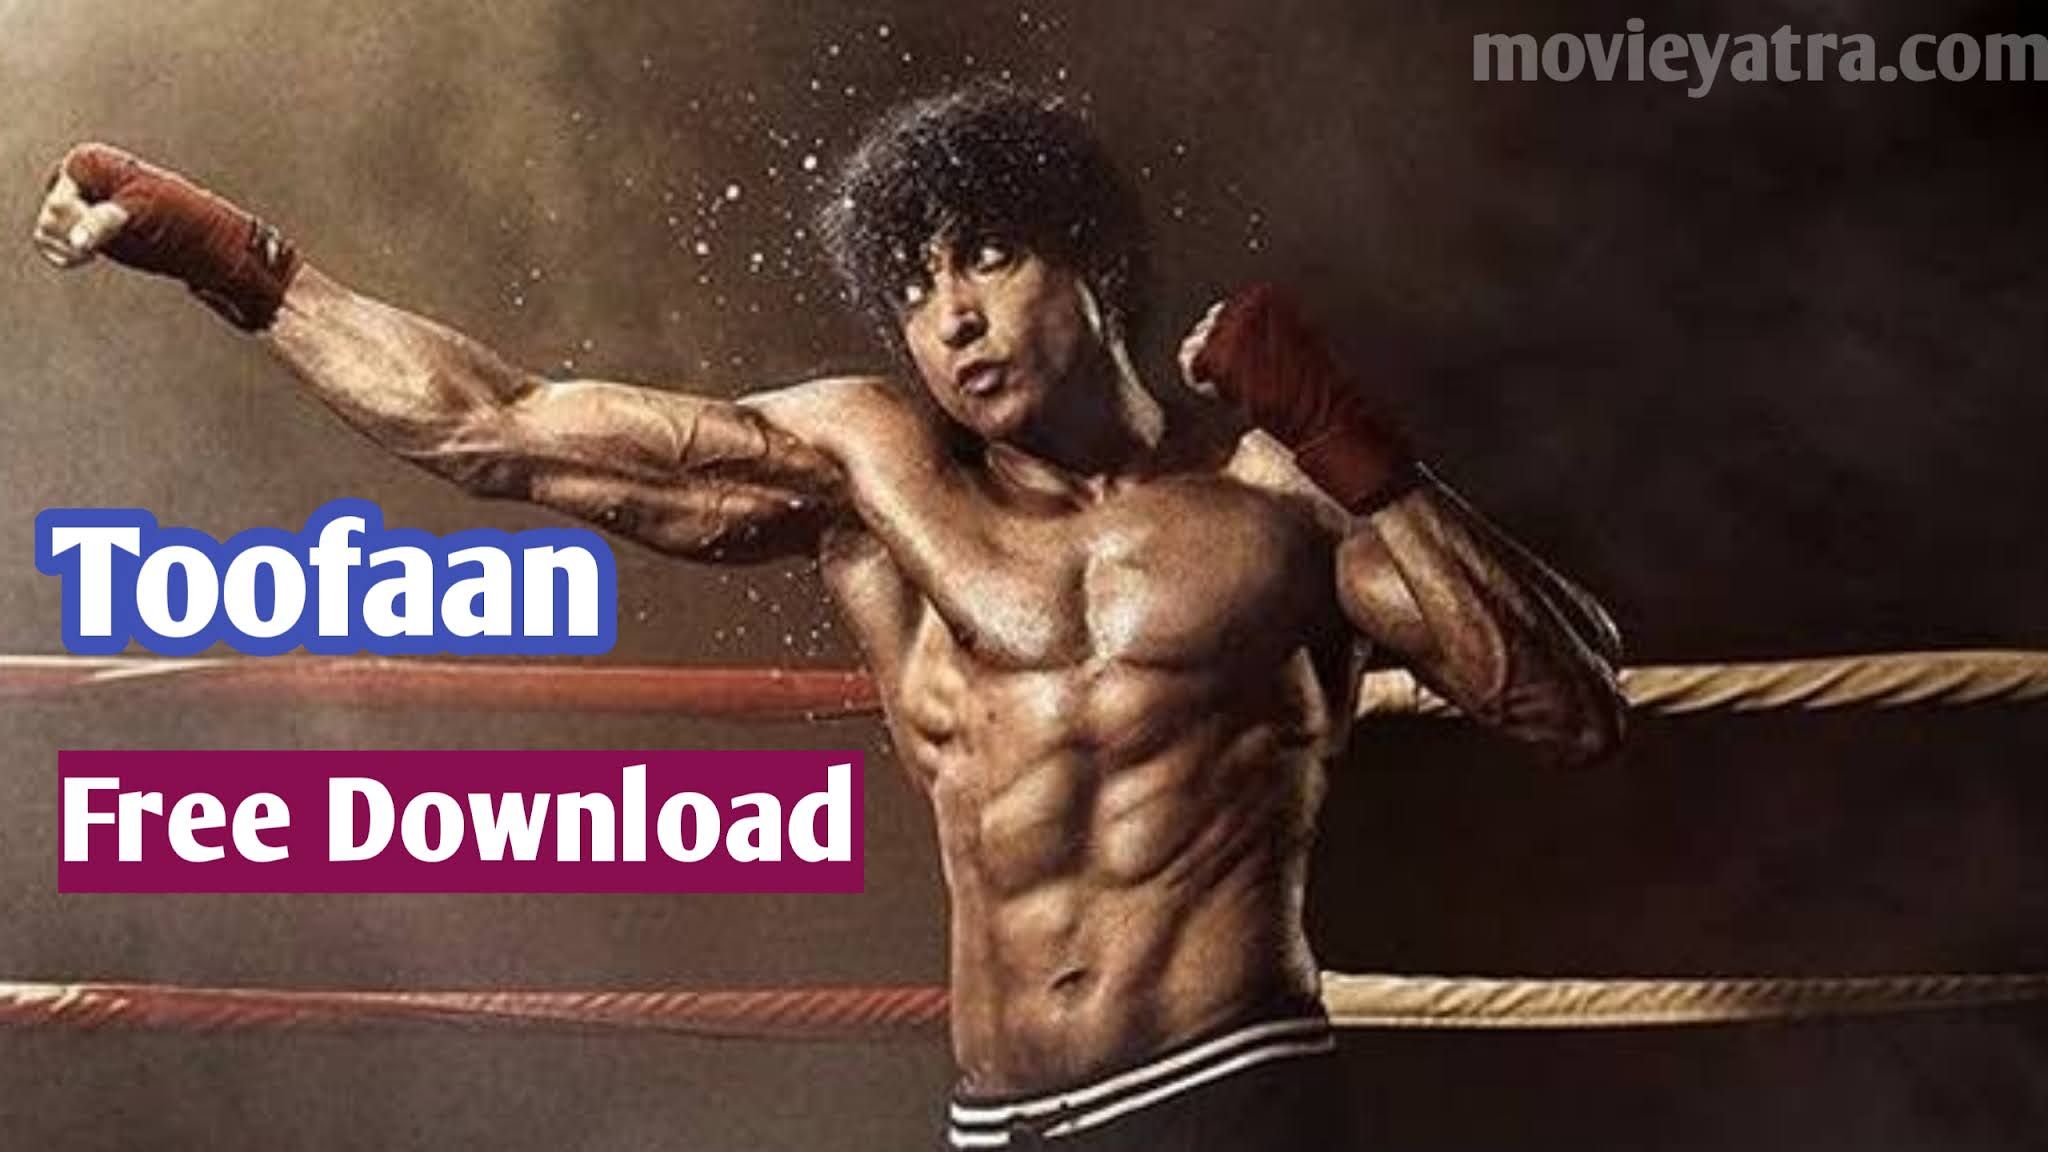 Toofaan movie download free hd quality and full movie explanation in hindi language Toofaan movie download free